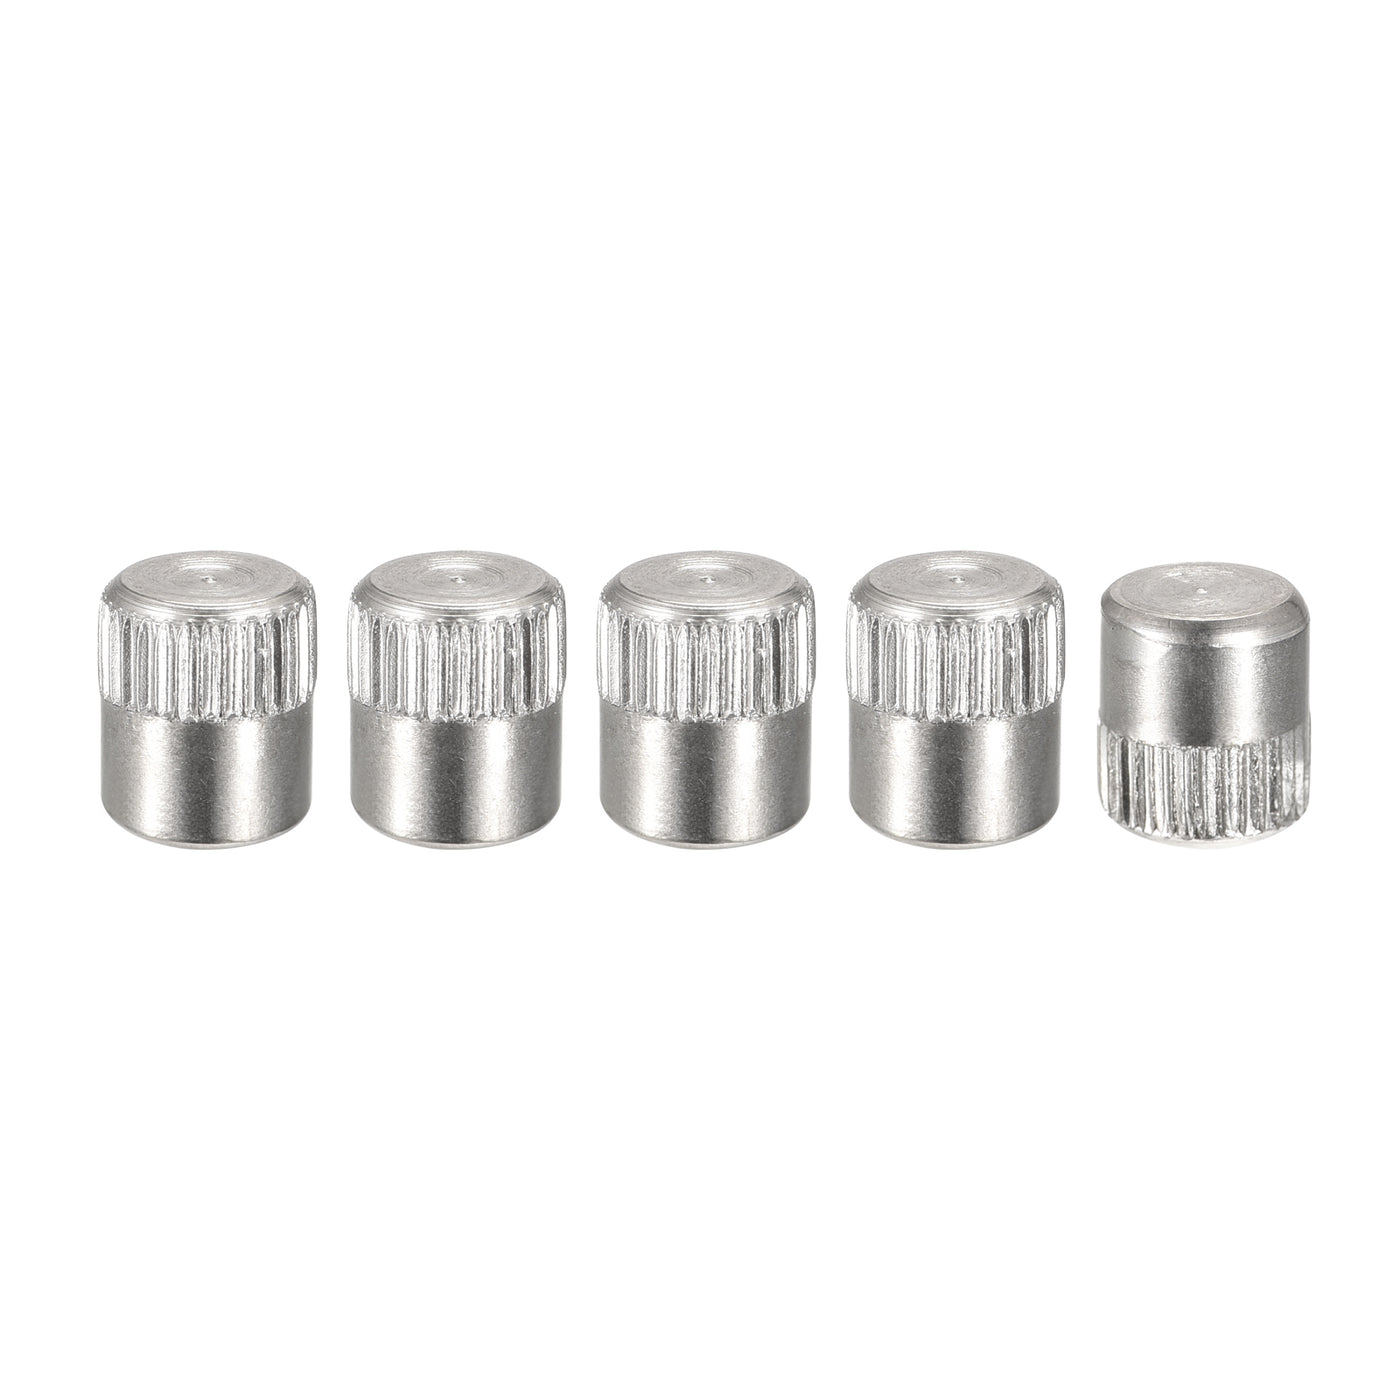 uxcell Uxcell 8x10mm 304 Stainless Steel Dowel Pins, 5Pcs Knurled Head Flat End Dowel Pin